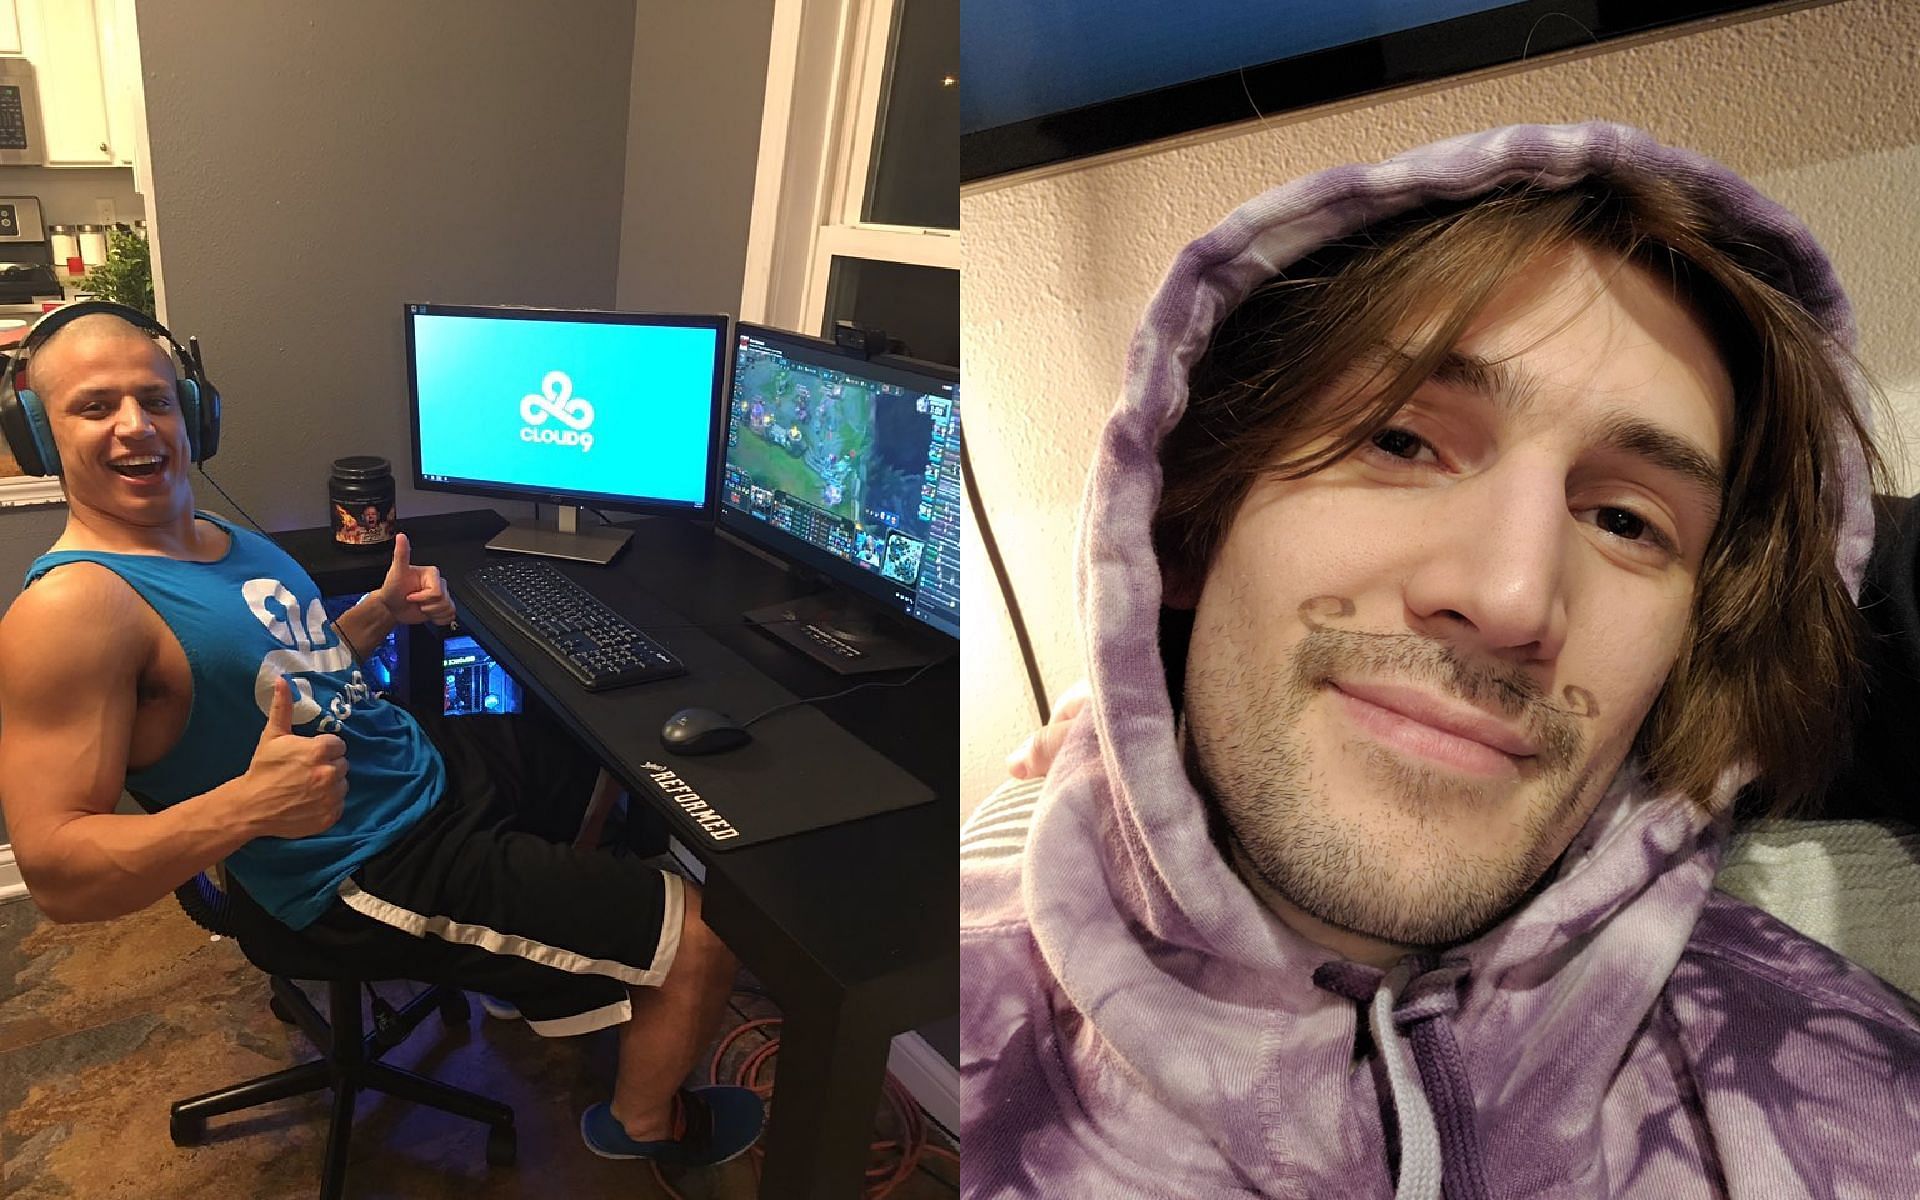 xQc jokes about Tyler1 living in a room underneath the staircase (Images via loltyler1 and xQcOW/Twitter)